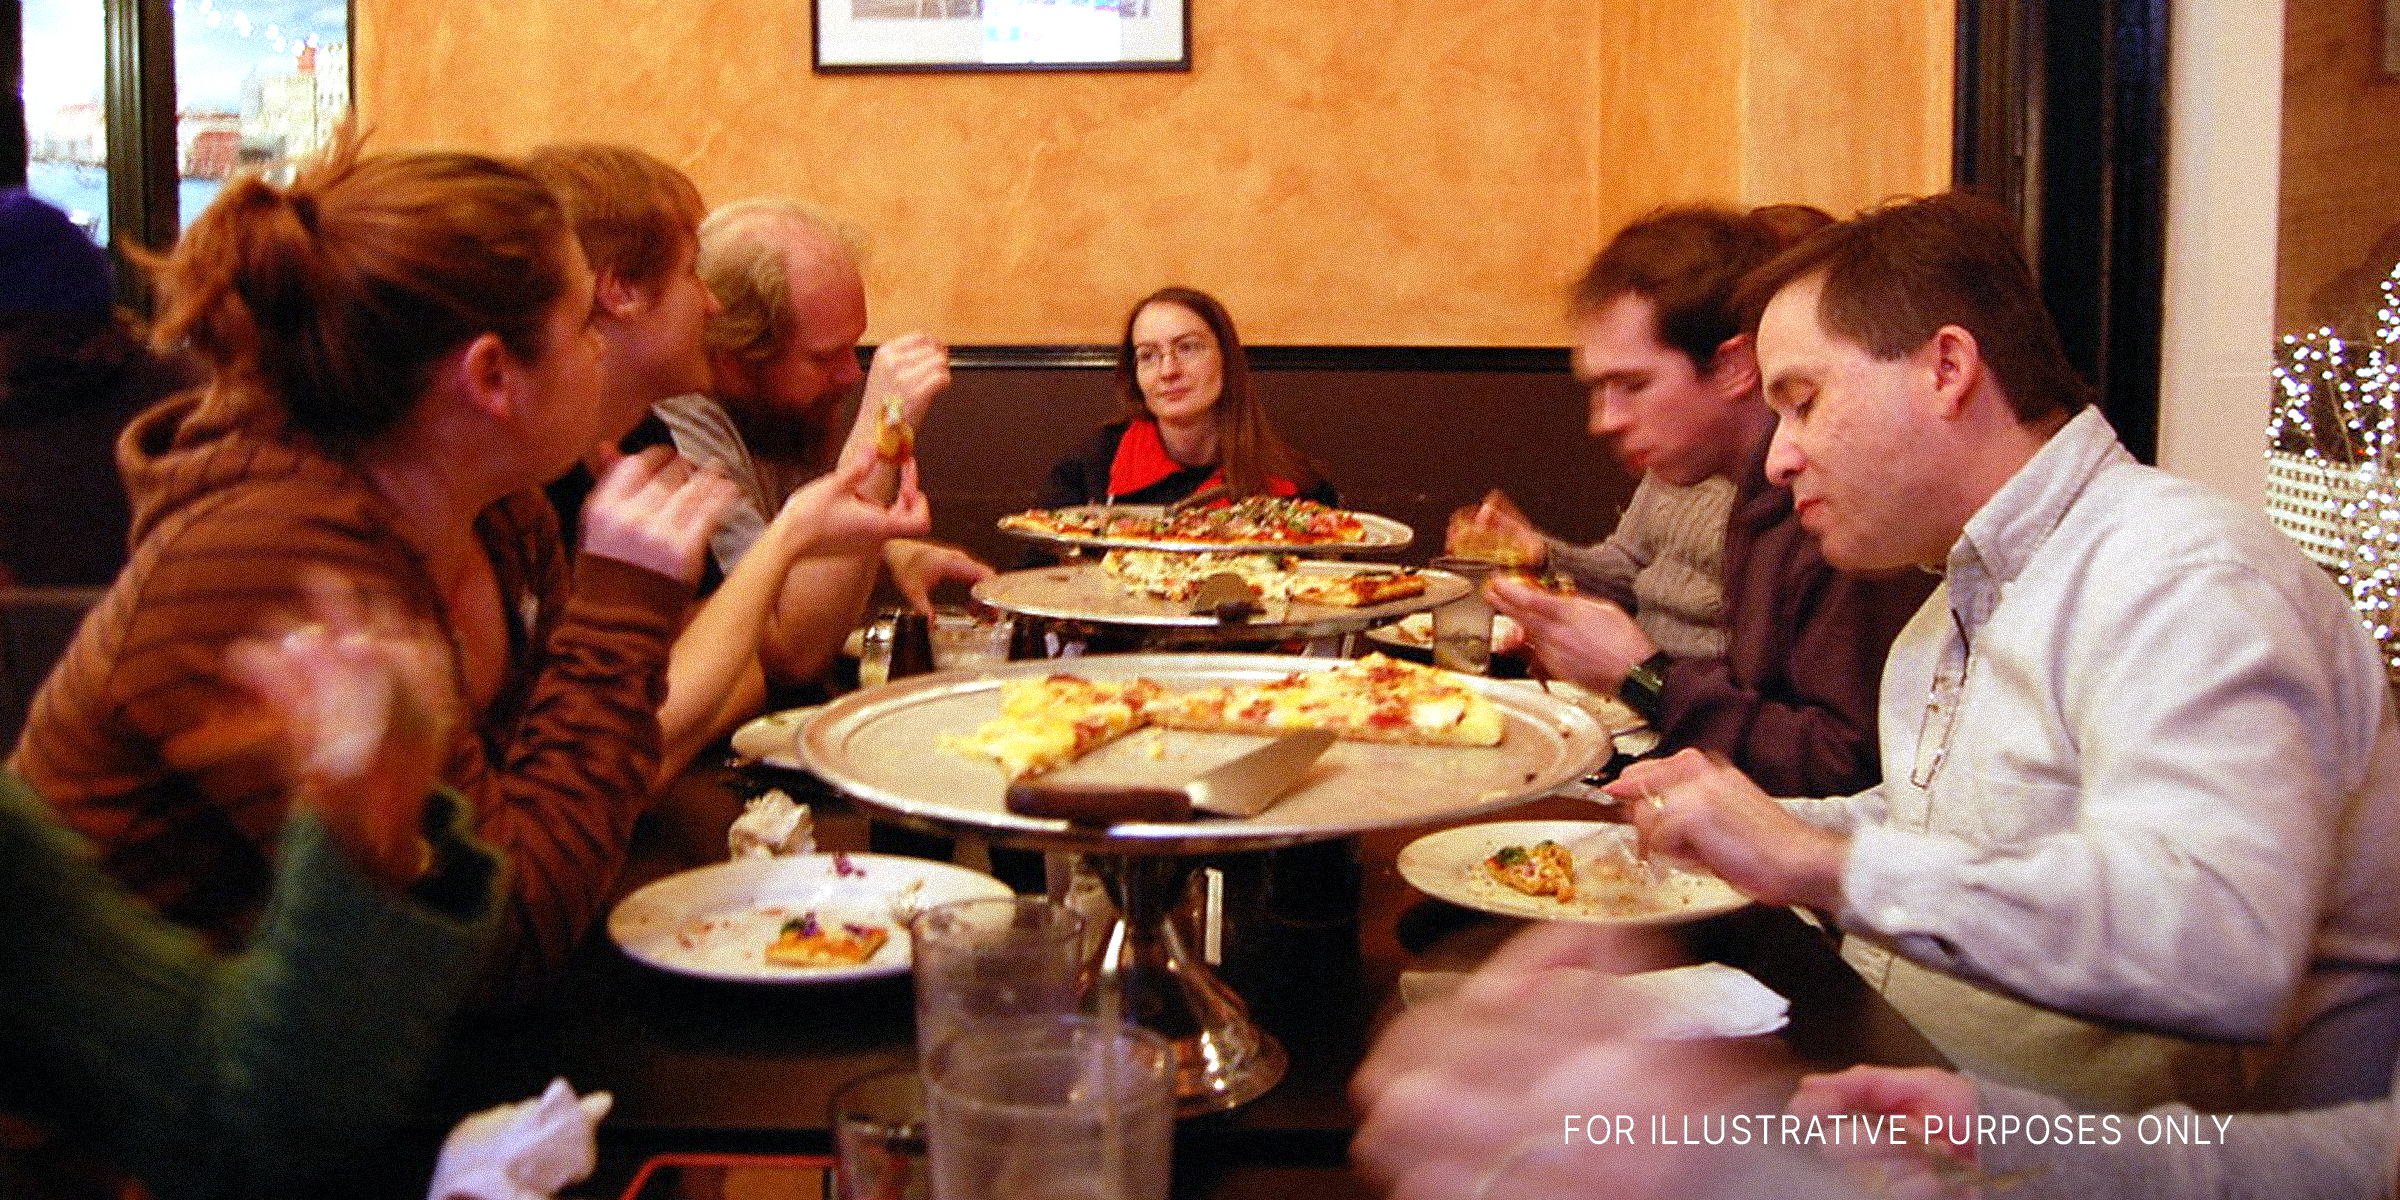 People sitting around a table and eating | Source: Flickr